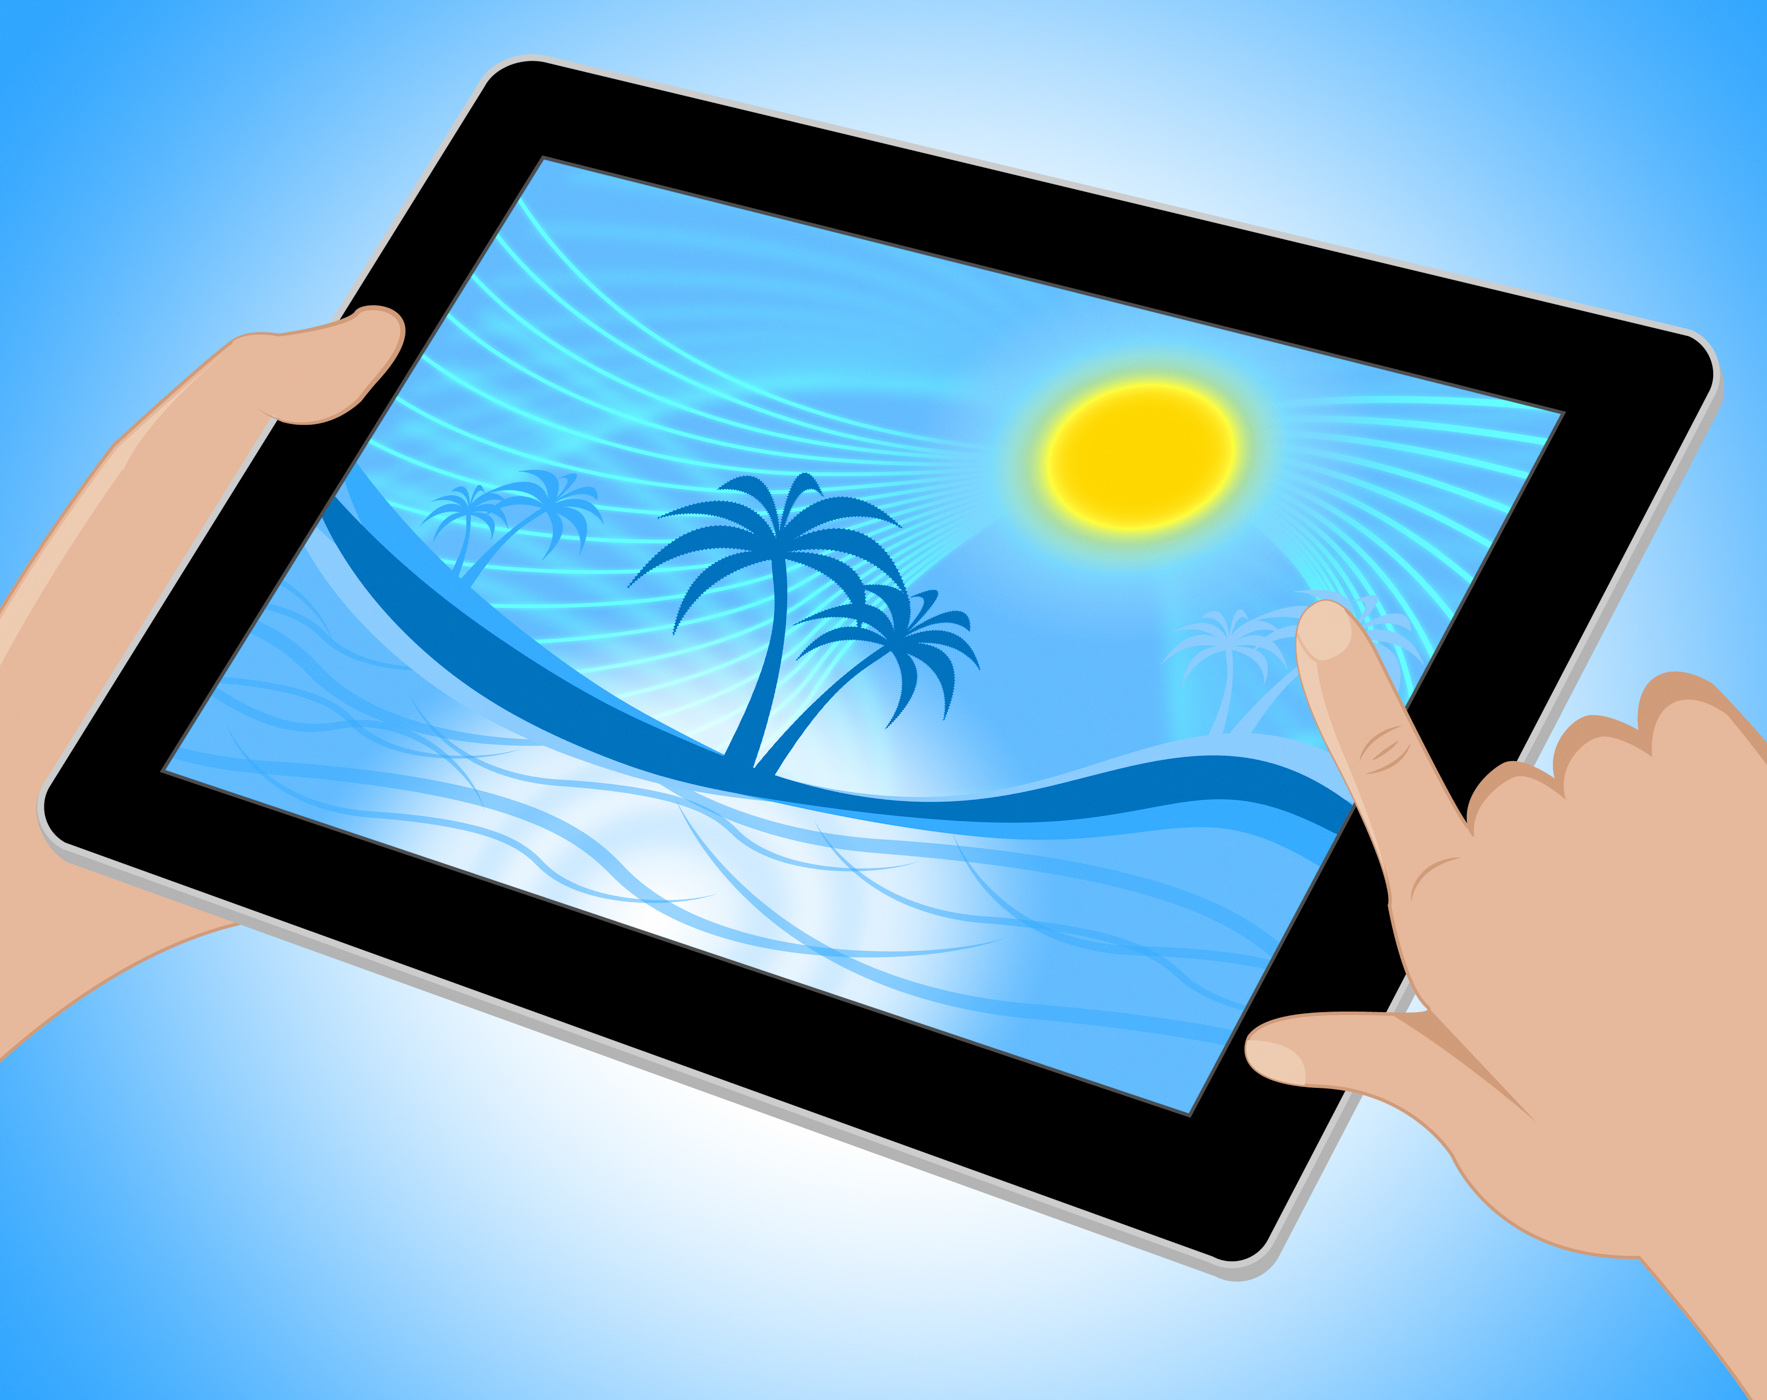 Palm tree indicates tropical climate and coastline tablet photo